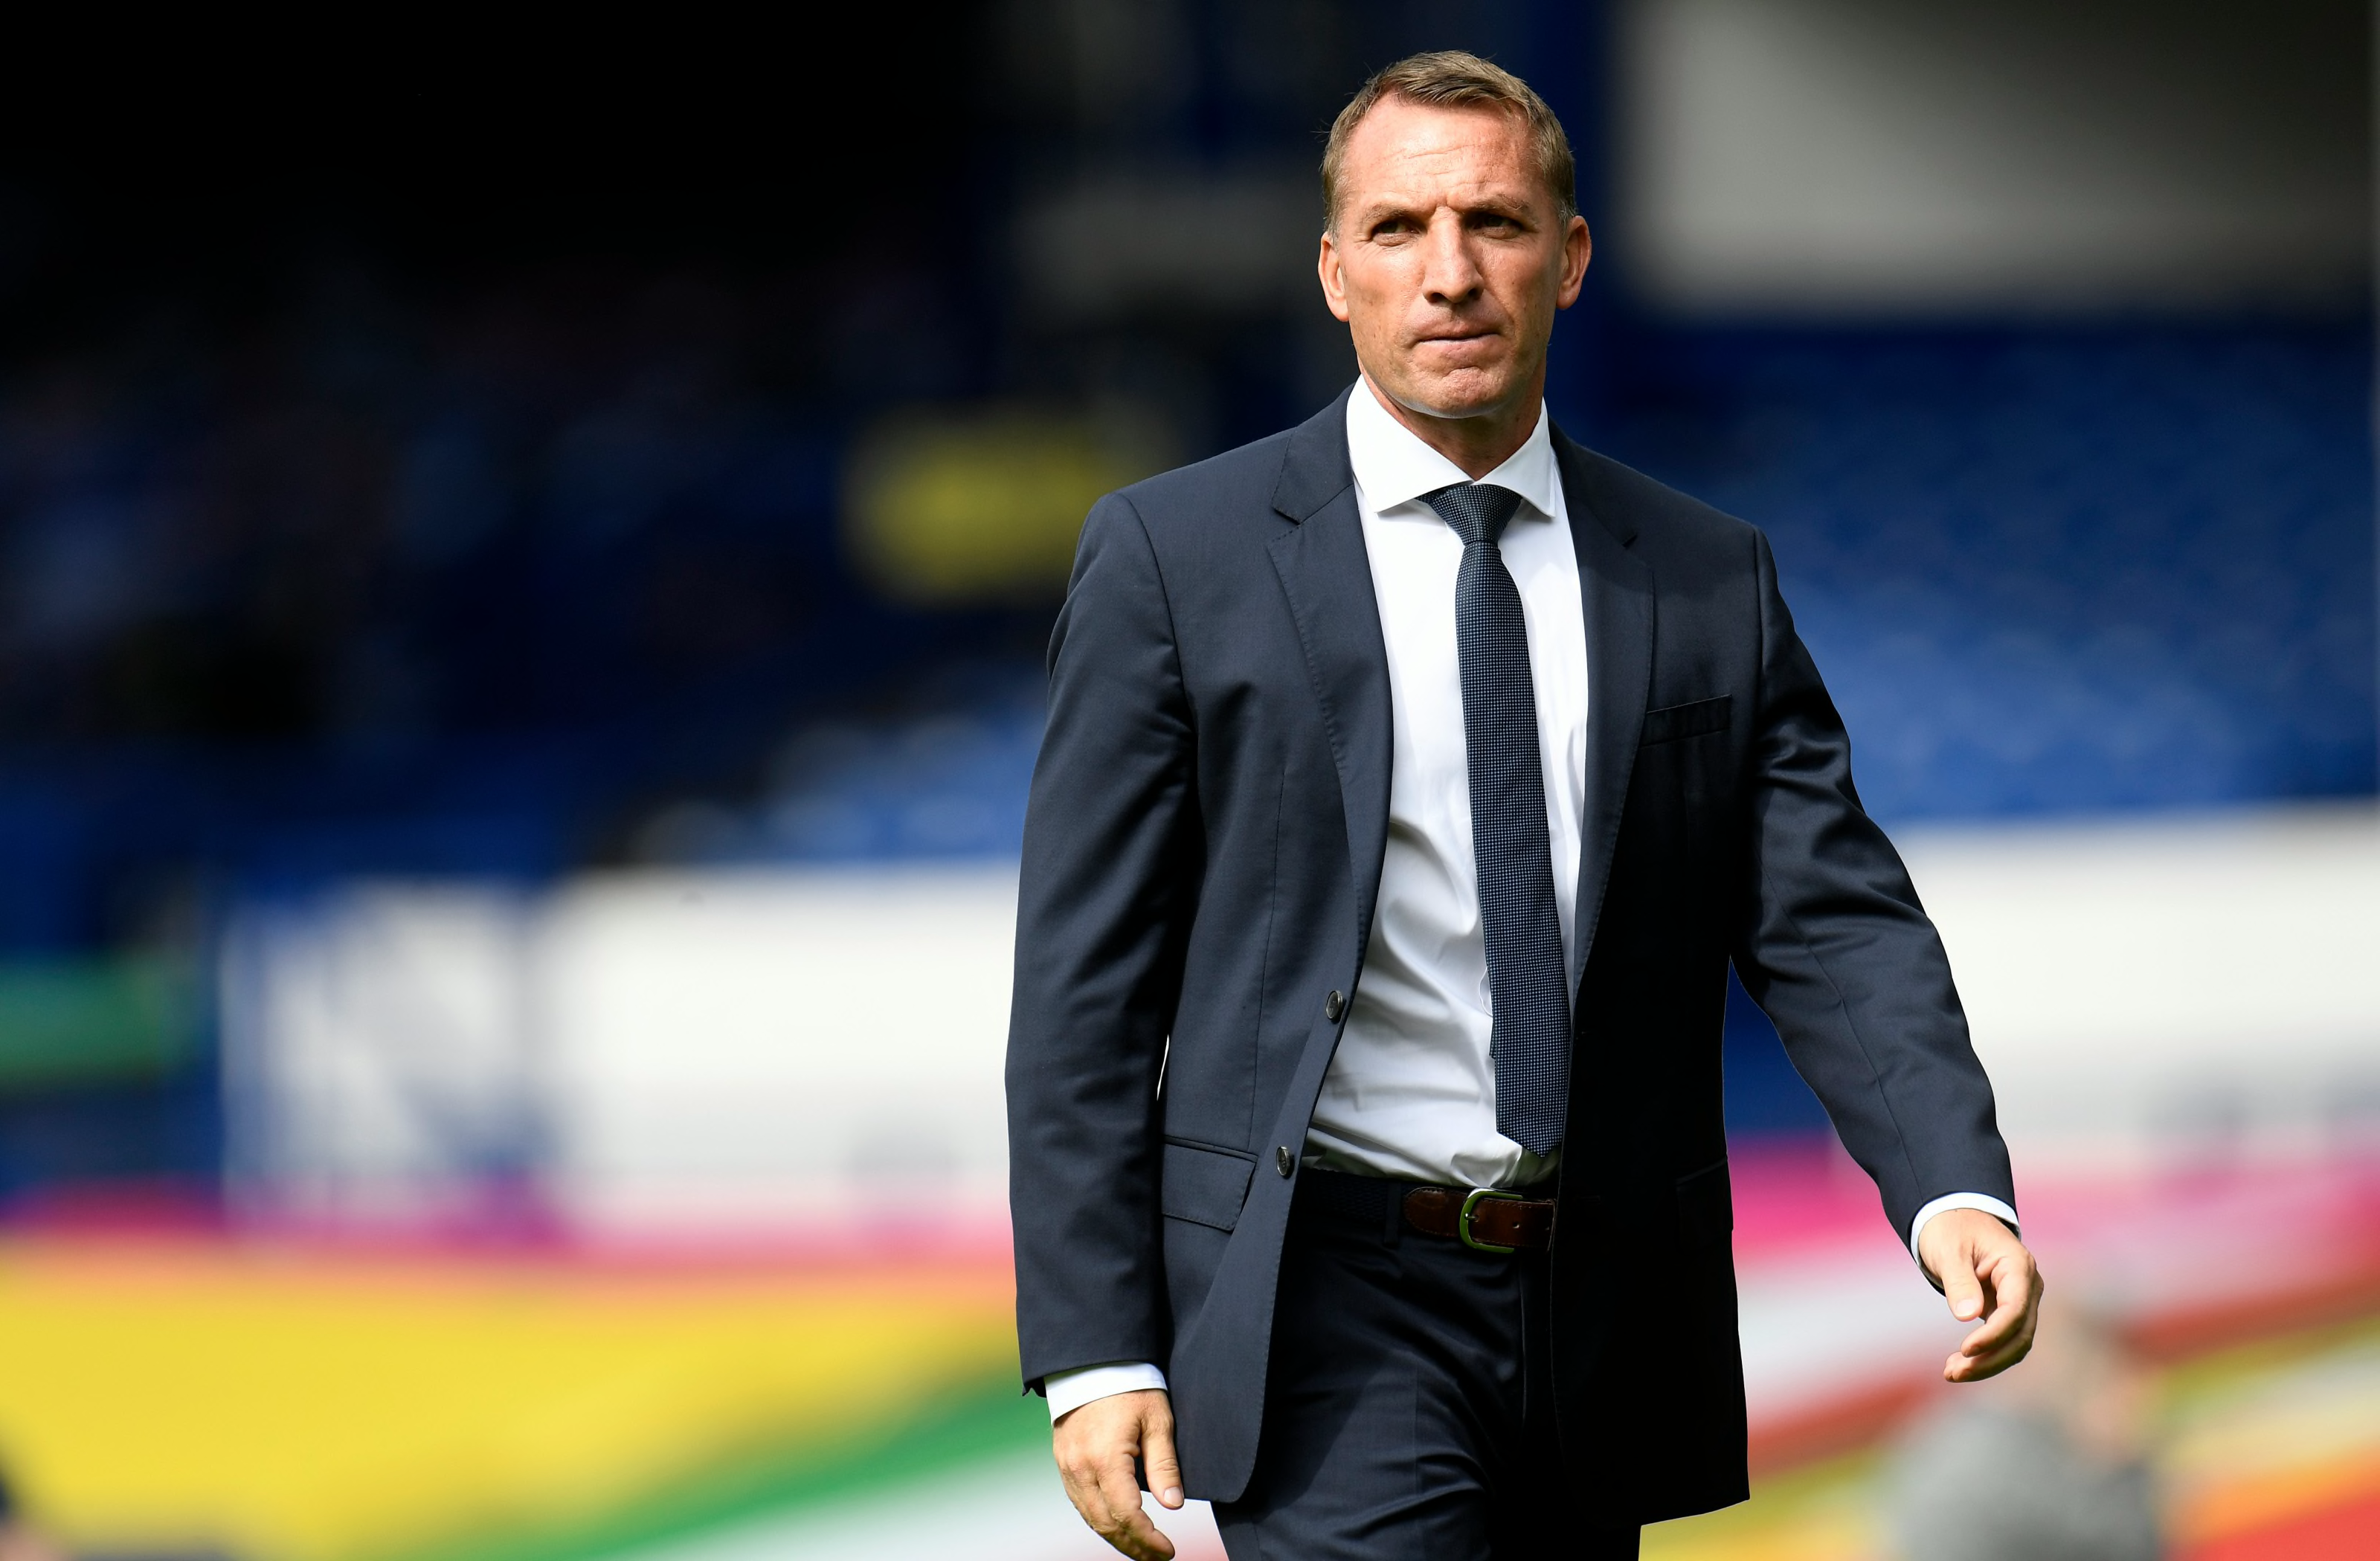 Brendan Rodgers enlightens Leicester City fans on team's away style